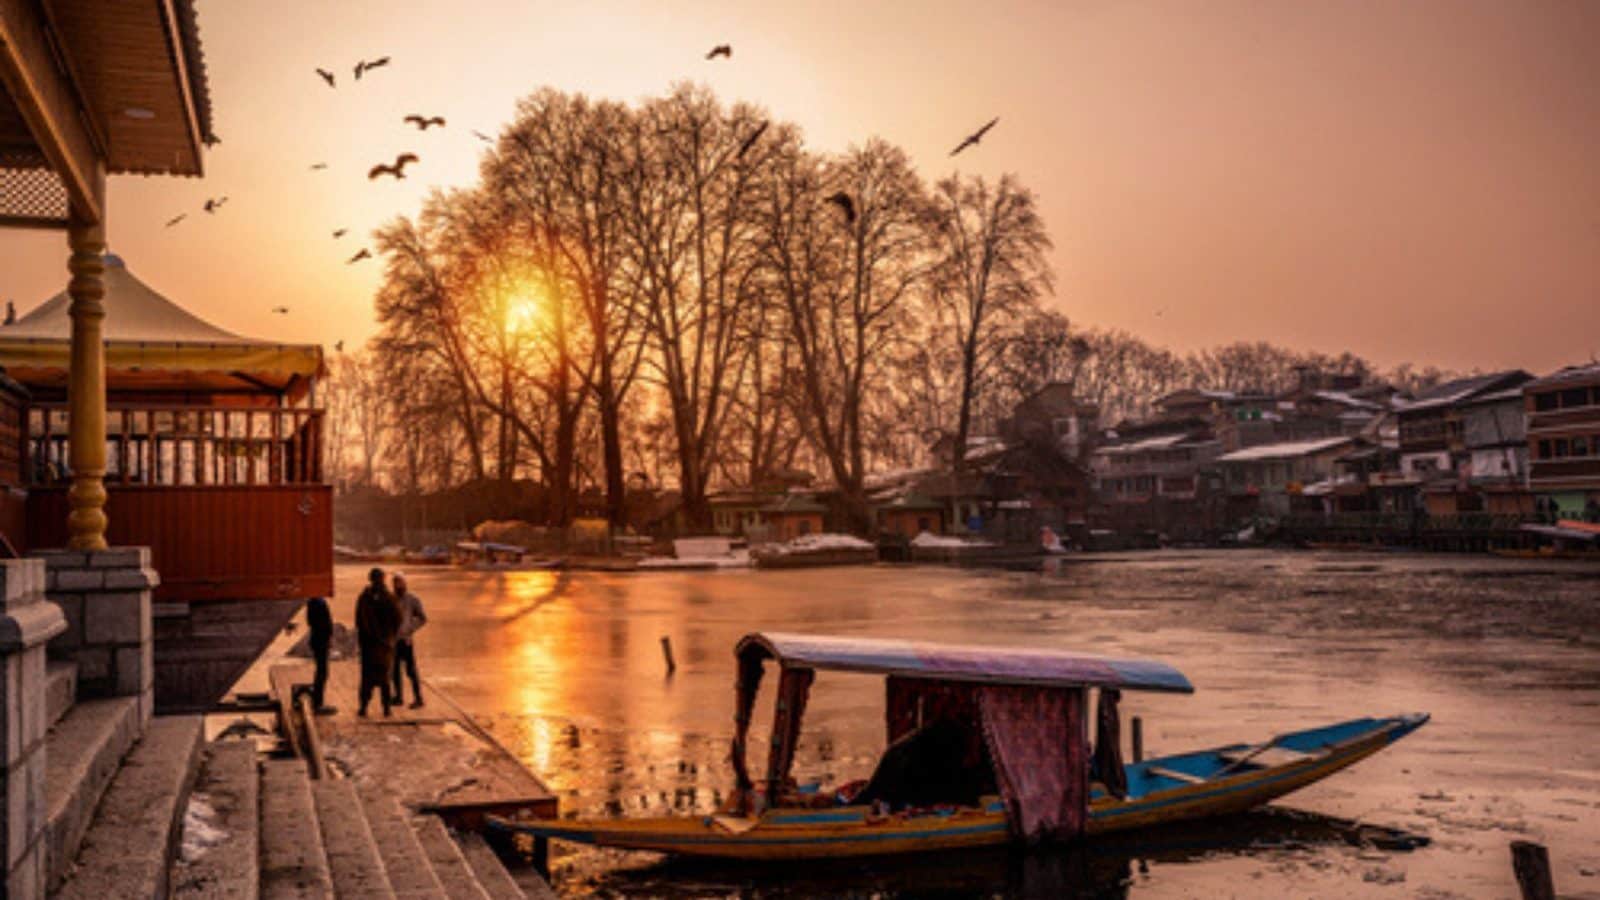 J&K Admin Plans Floating Open Air Theatre on Dal Lake to Portray Kashmir’s Culture, Heritage